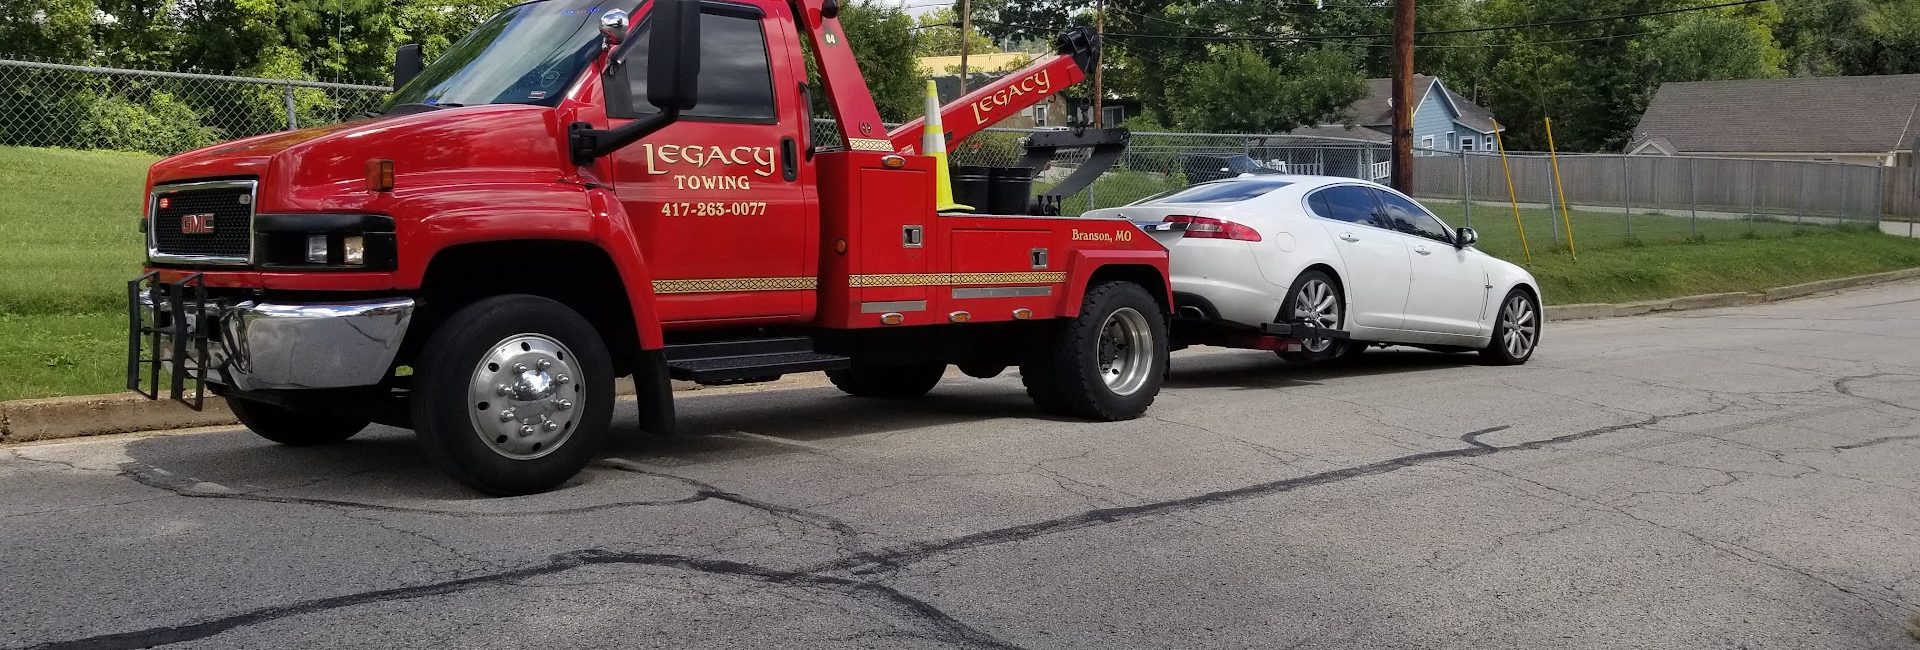 Legacy Roadside Assistance and Towing 2